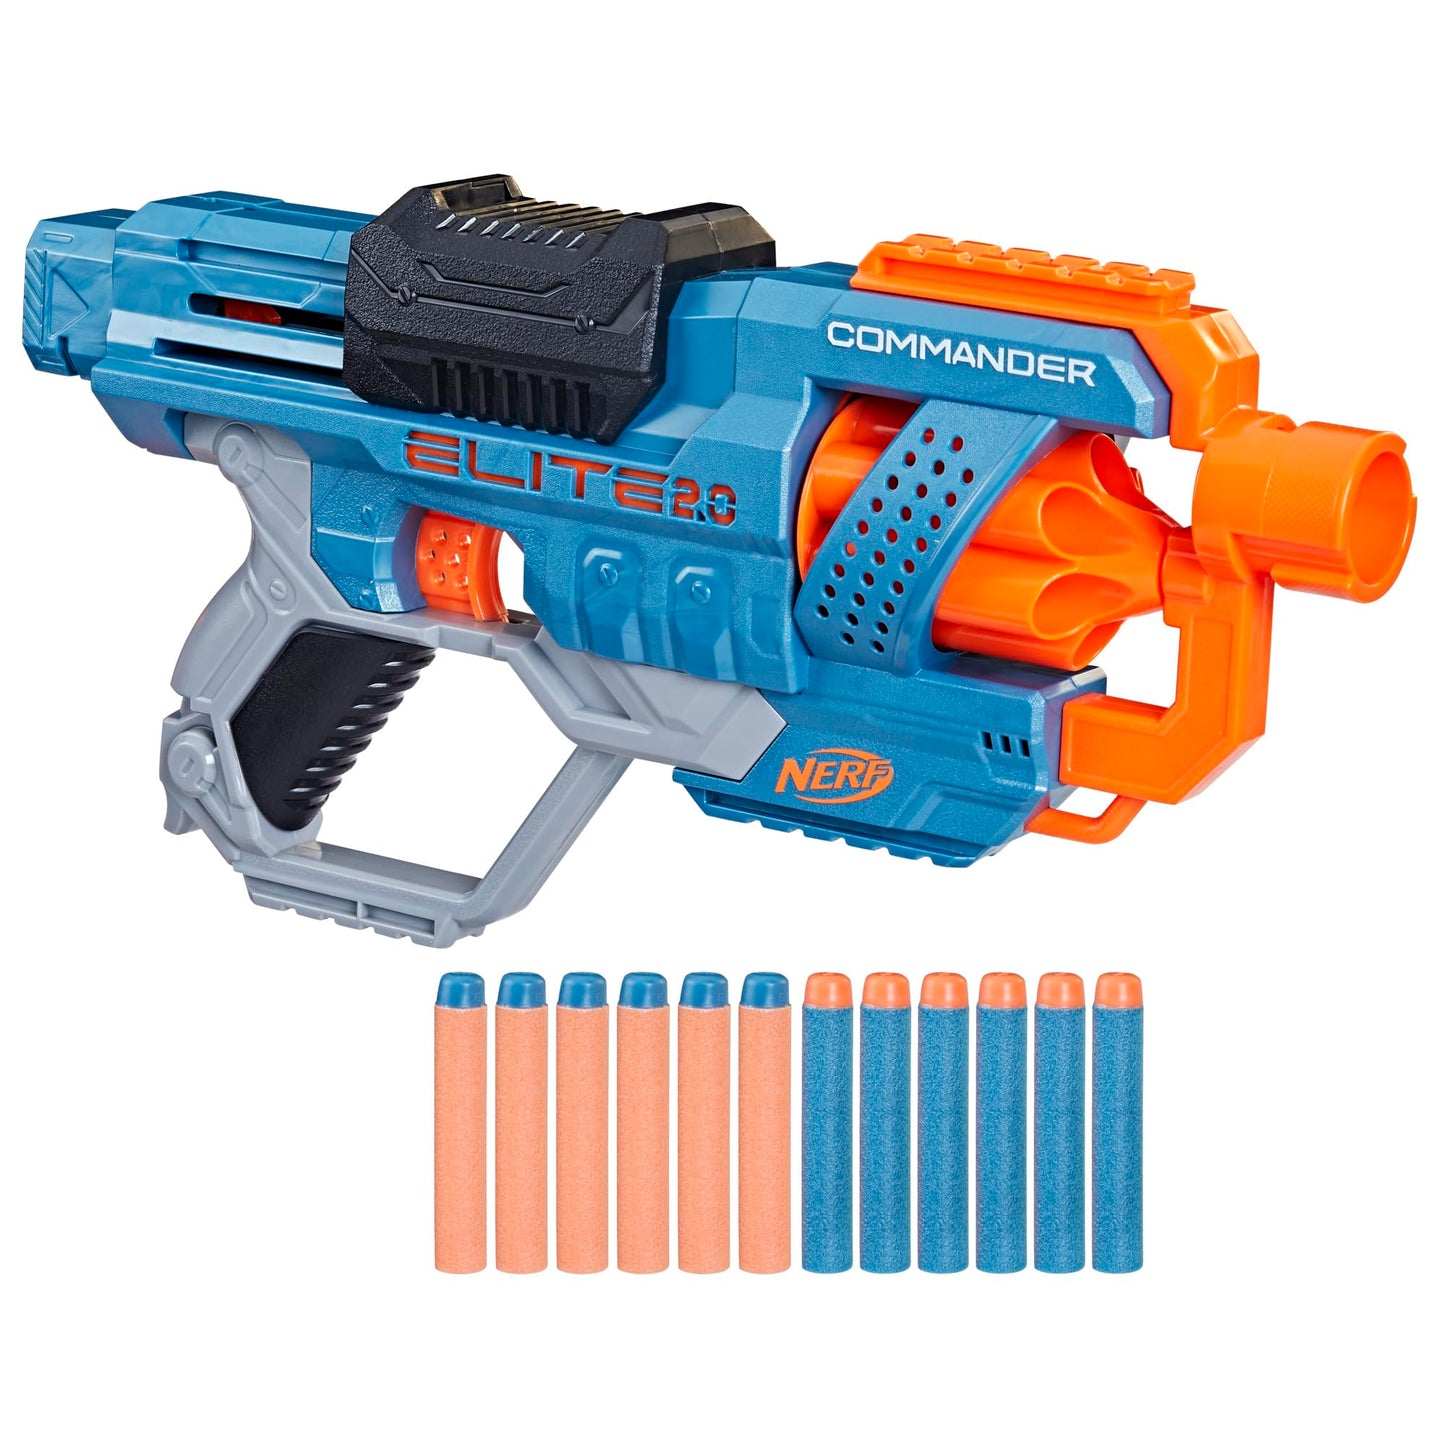 Nerf Elite 2.0 Commander RD-6 Dart Blaster, 12 Darts, 6-Dart Rotating Drum, Outdoor Toys, Great Holiday for Kids, Ages 8 and Up